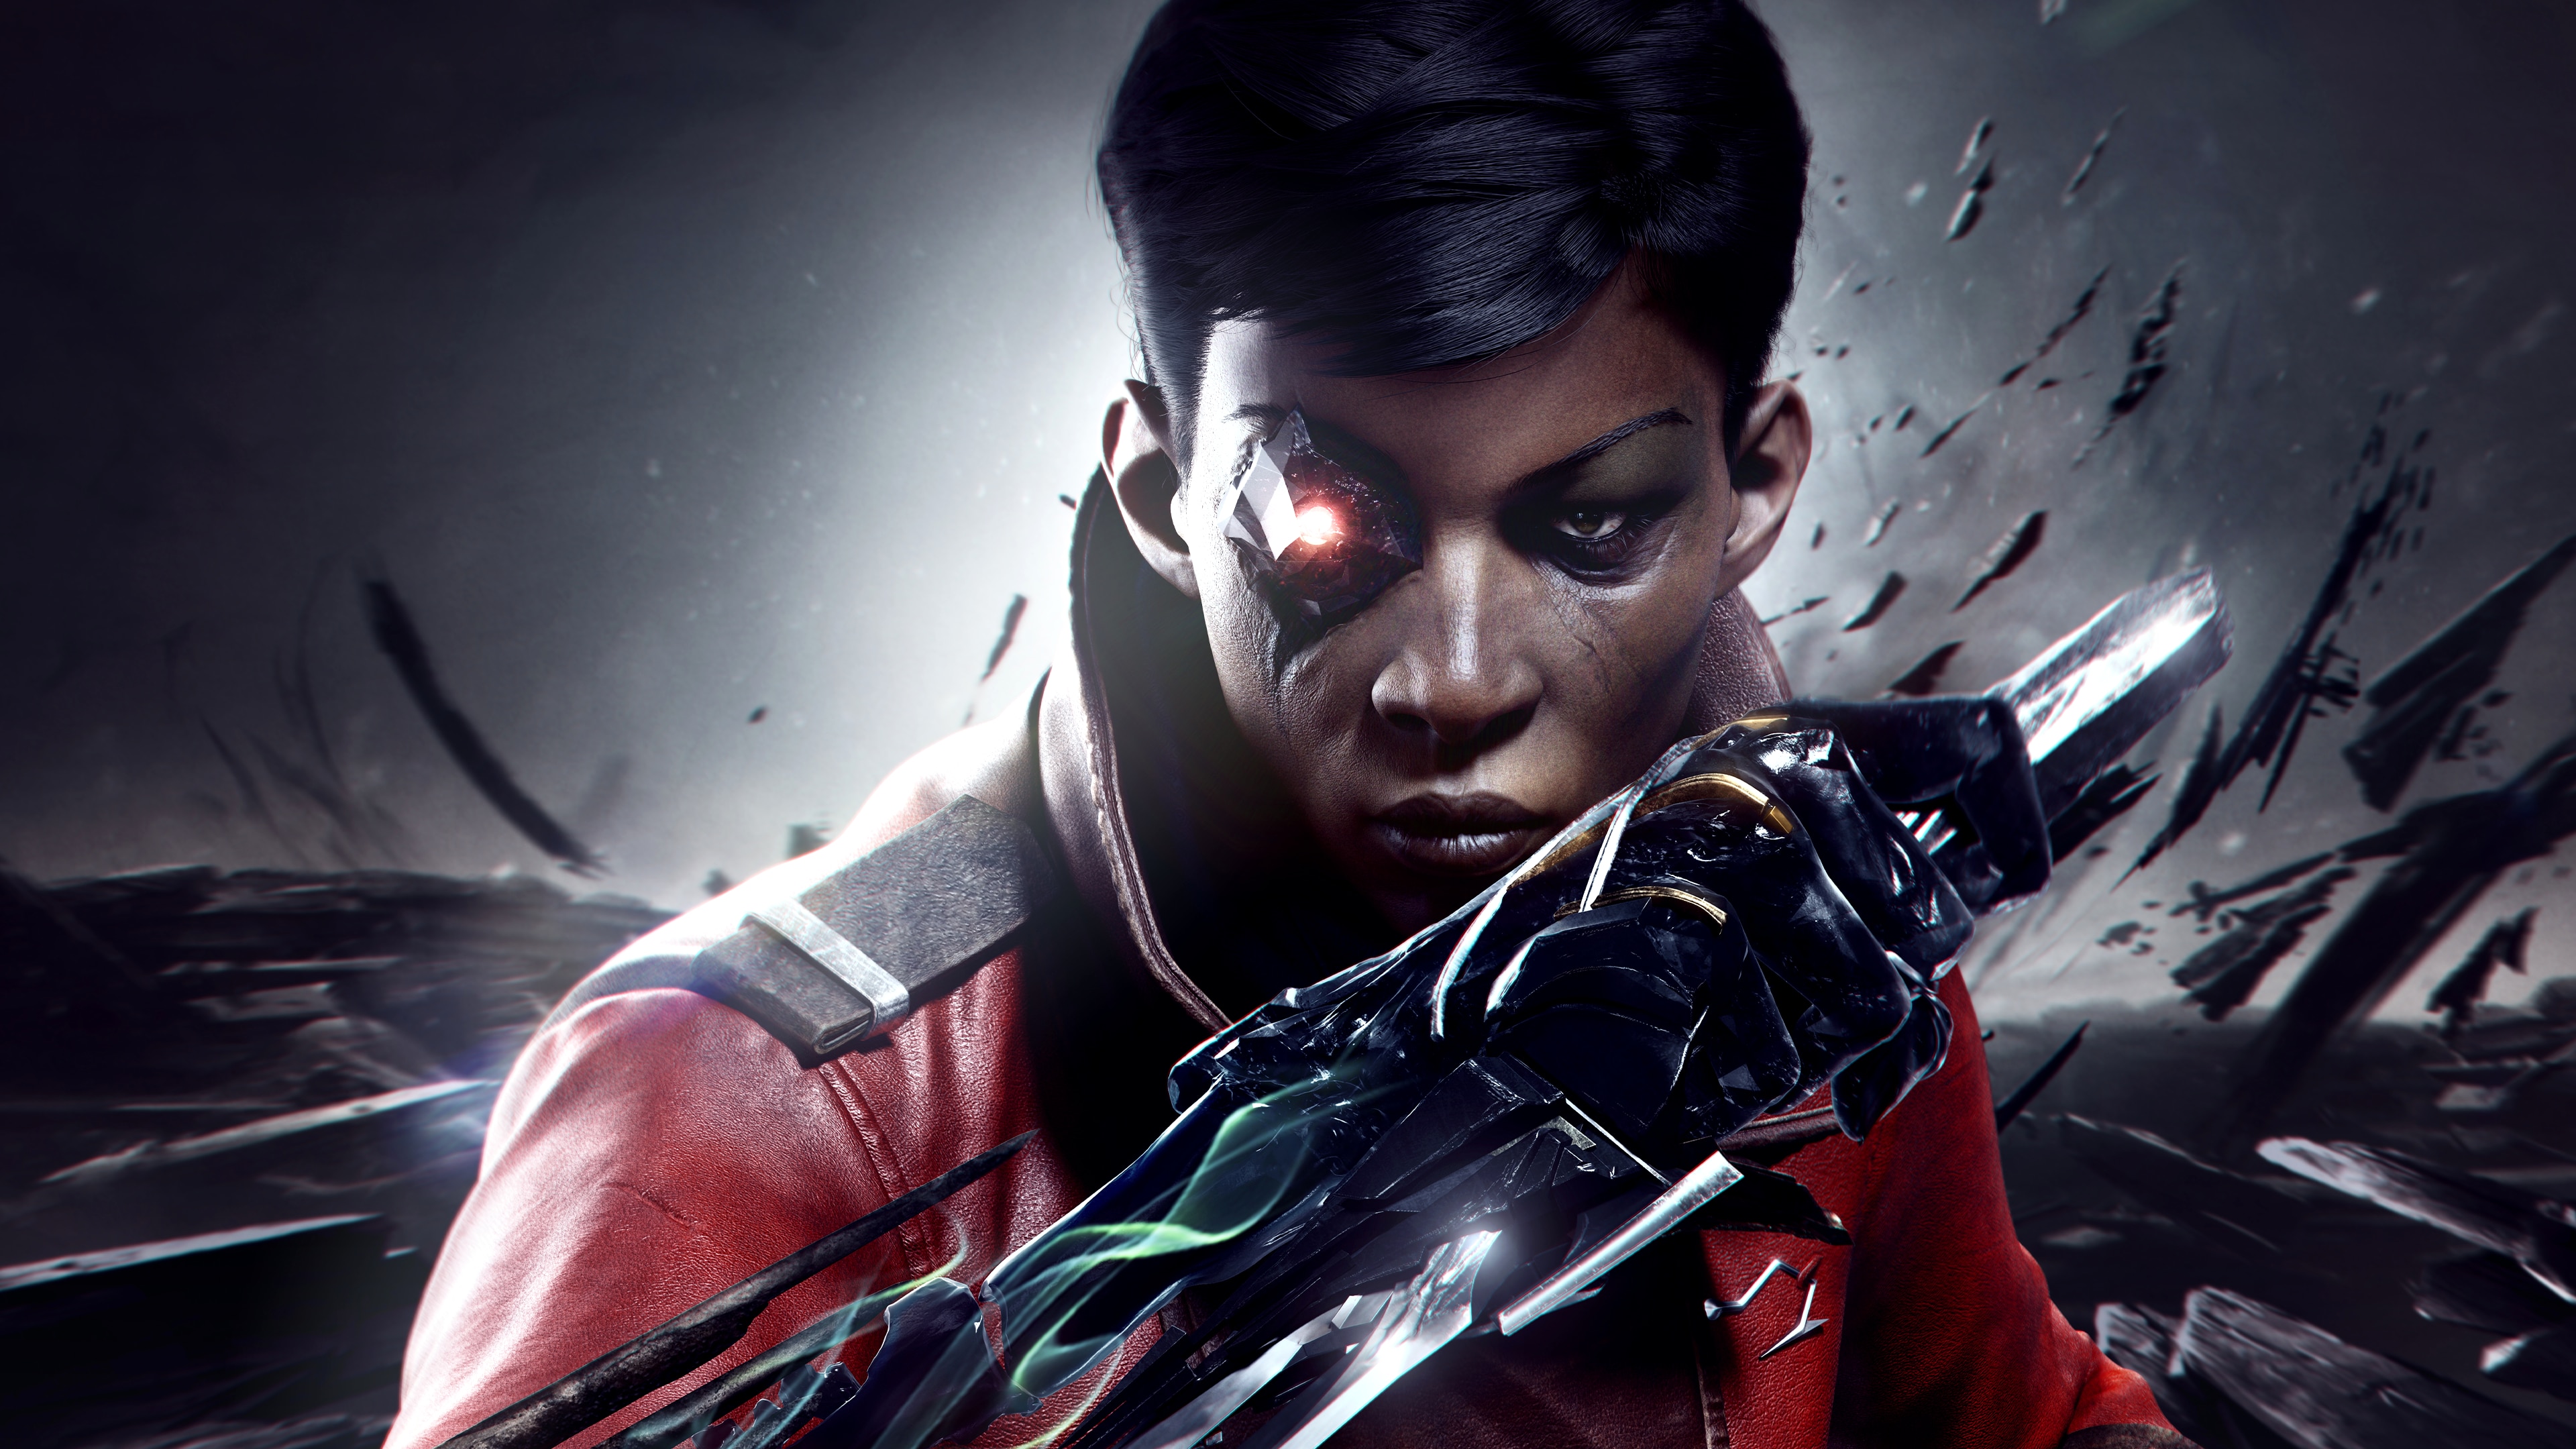 Dishonored: Death of the Outsider 4k Ultra HD Wallpaper